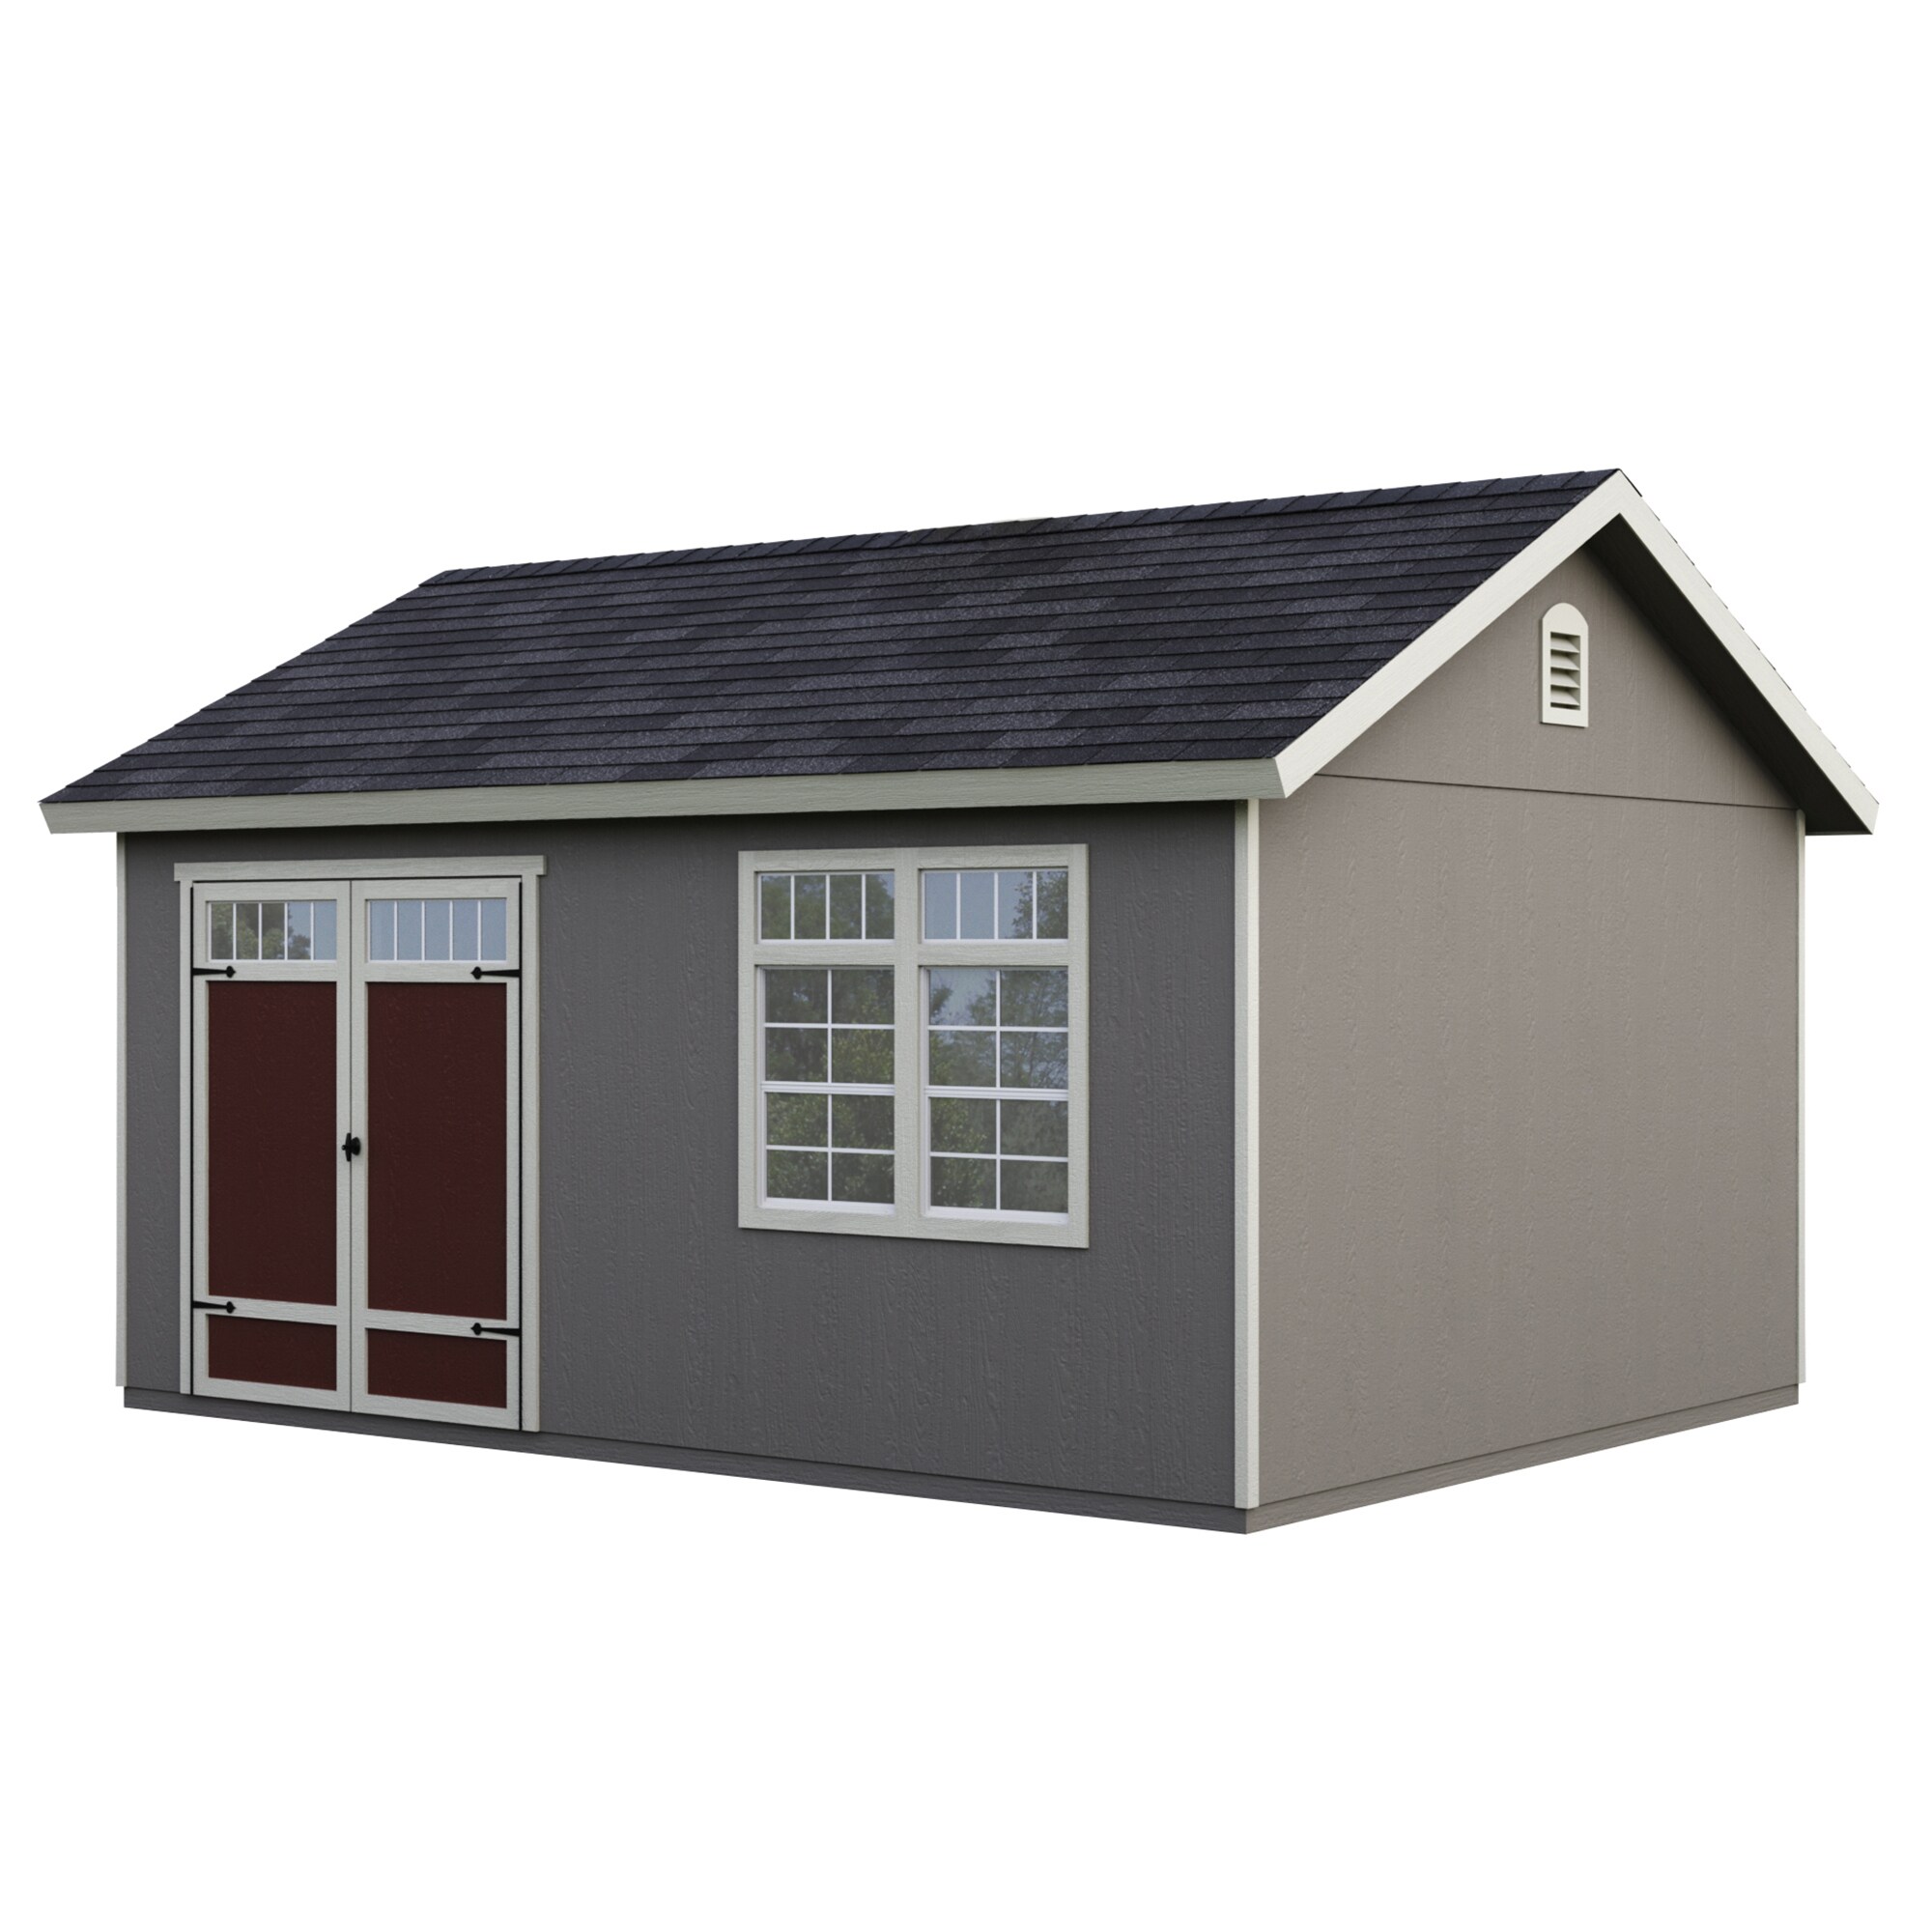 Heartland Kennedale 16-ft x 12-ft Storage Shed (Floor Included)